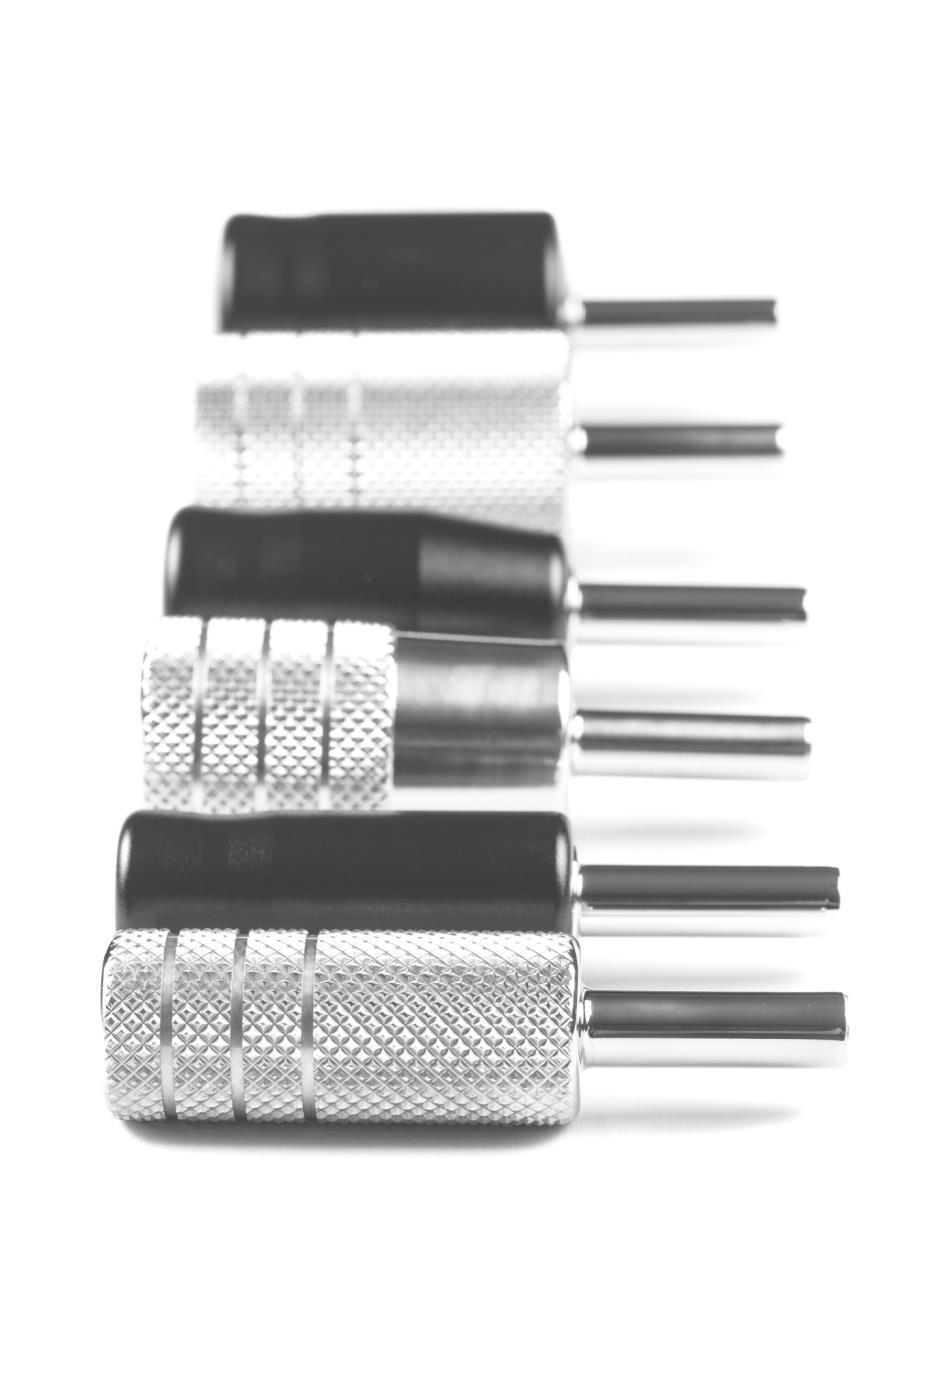 T-Tech uses medical grade stainless steel for all of its cartridge grips. The colored grips have an aluminum coating and currently come in black color only.